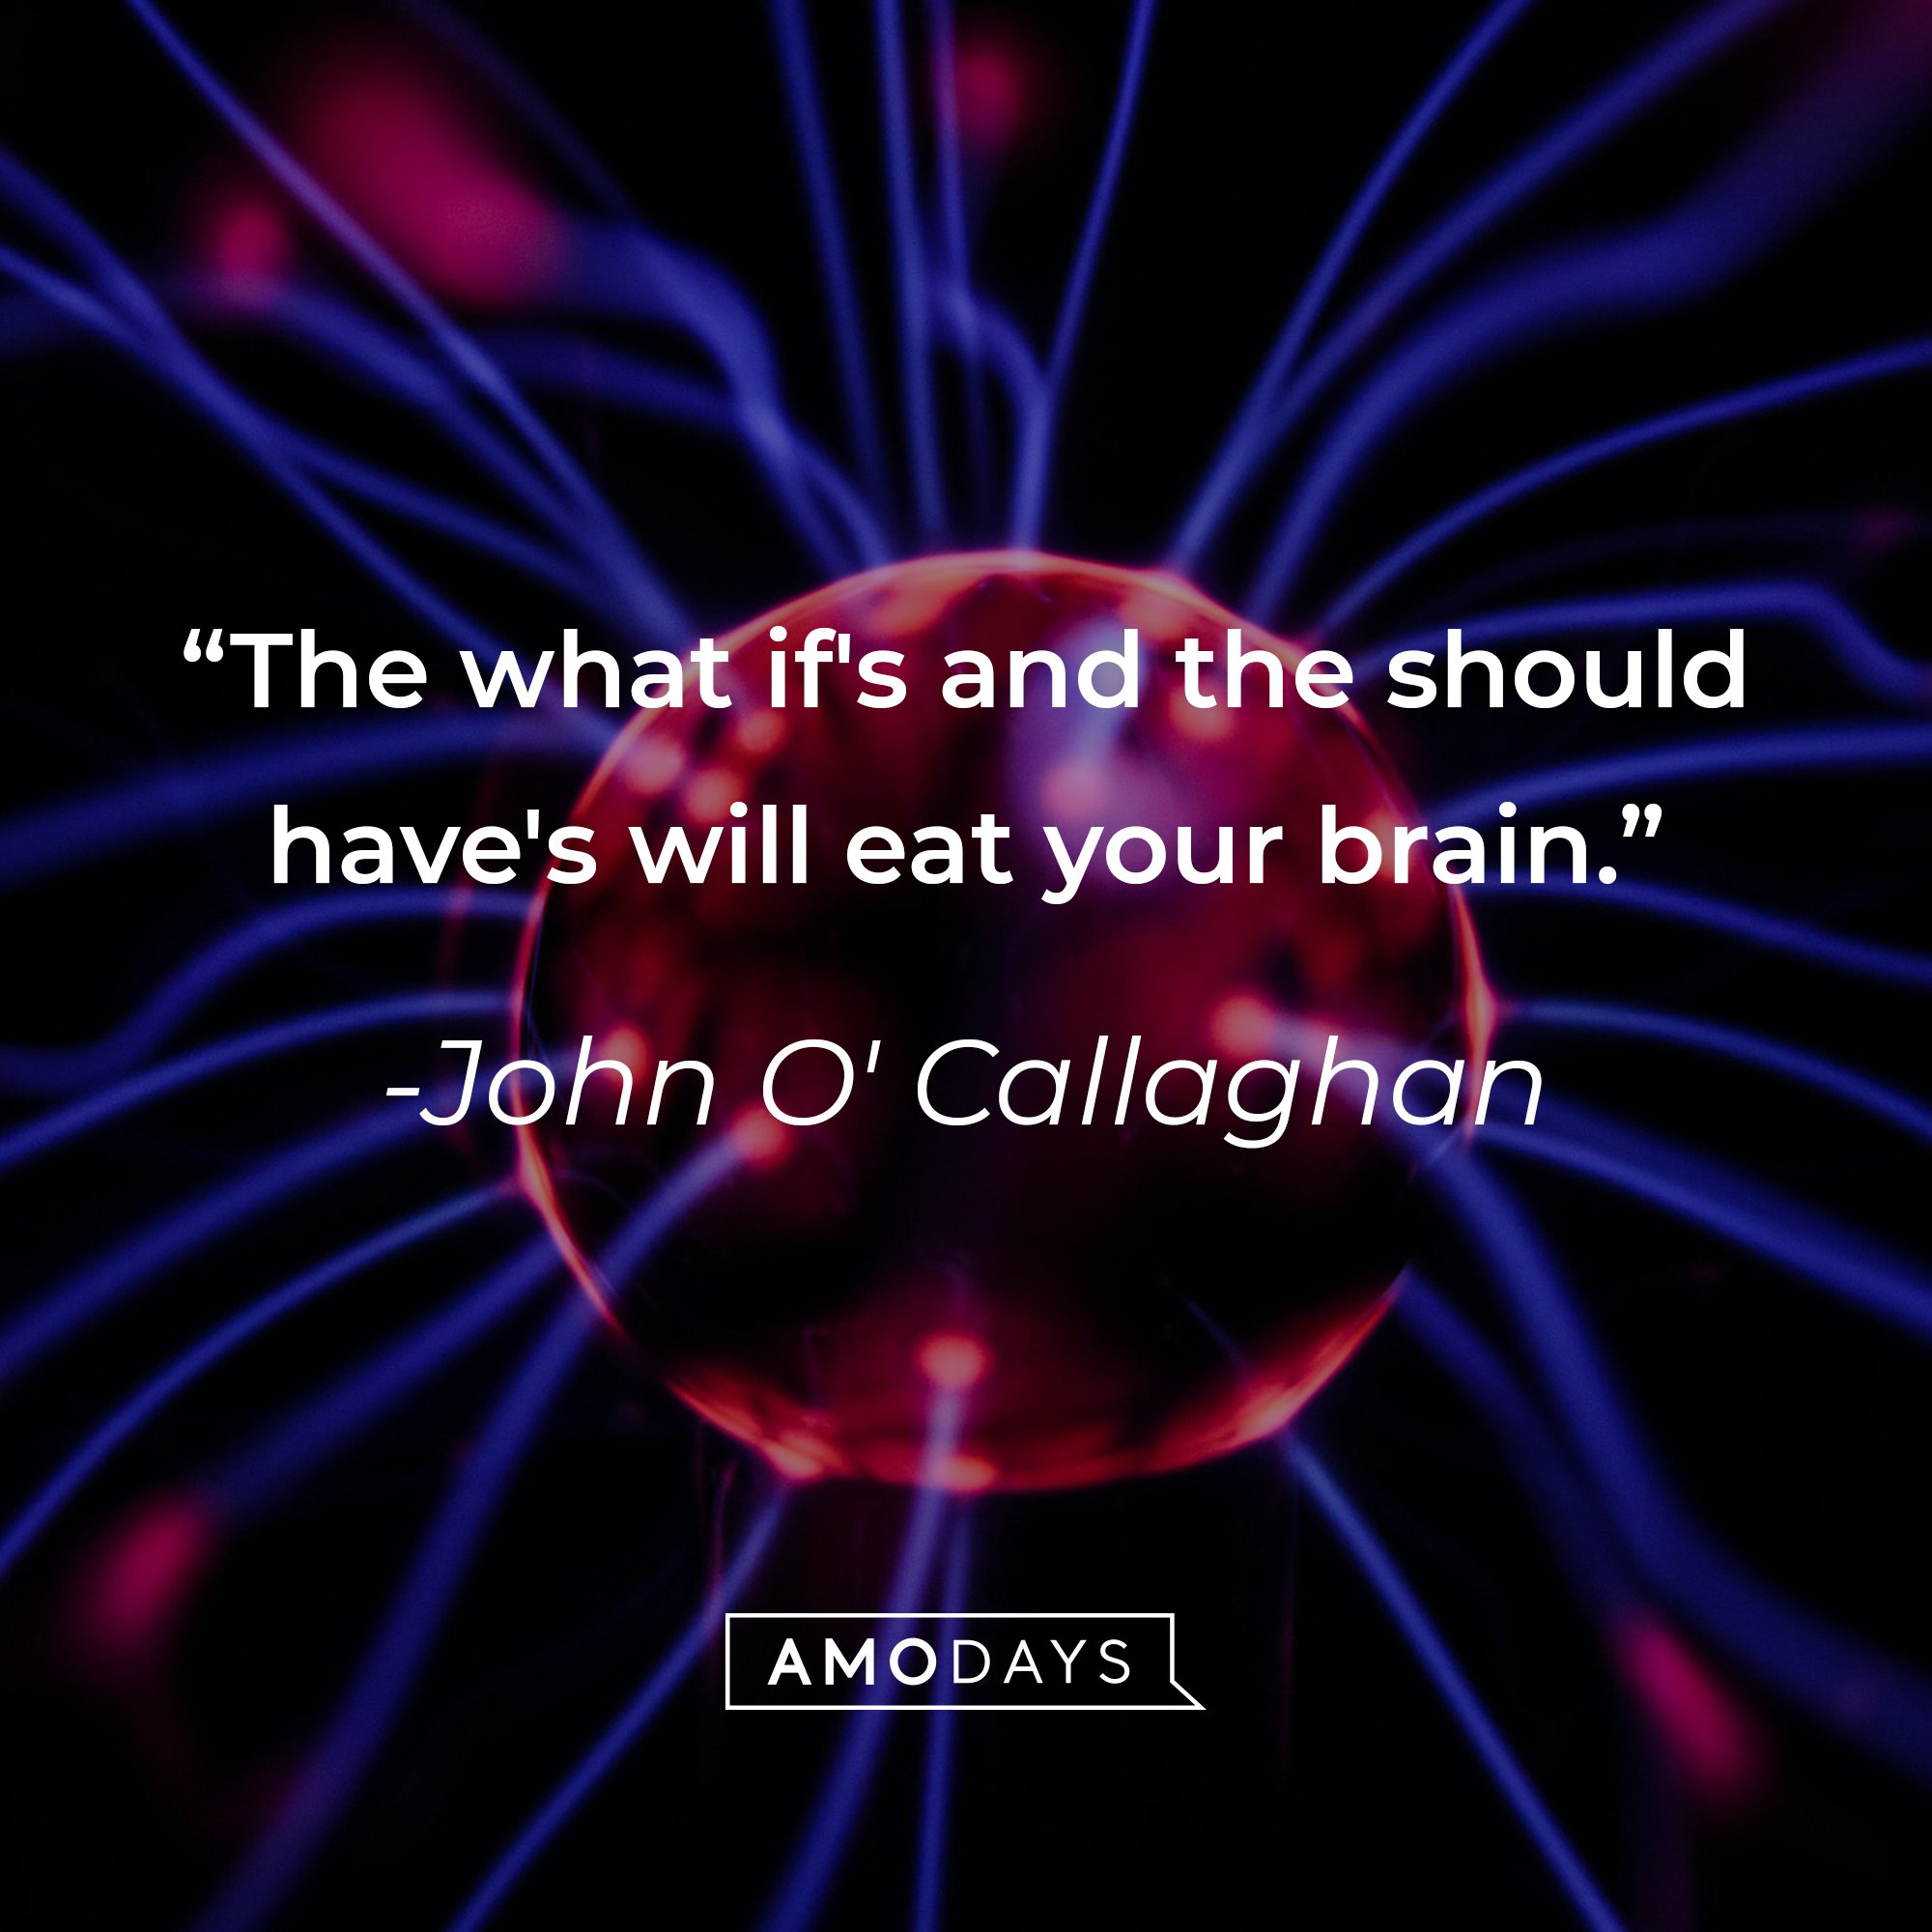 John O'Callagahn's quote: "The what if's and the should have's will eat your brain." | Image: AmoDays